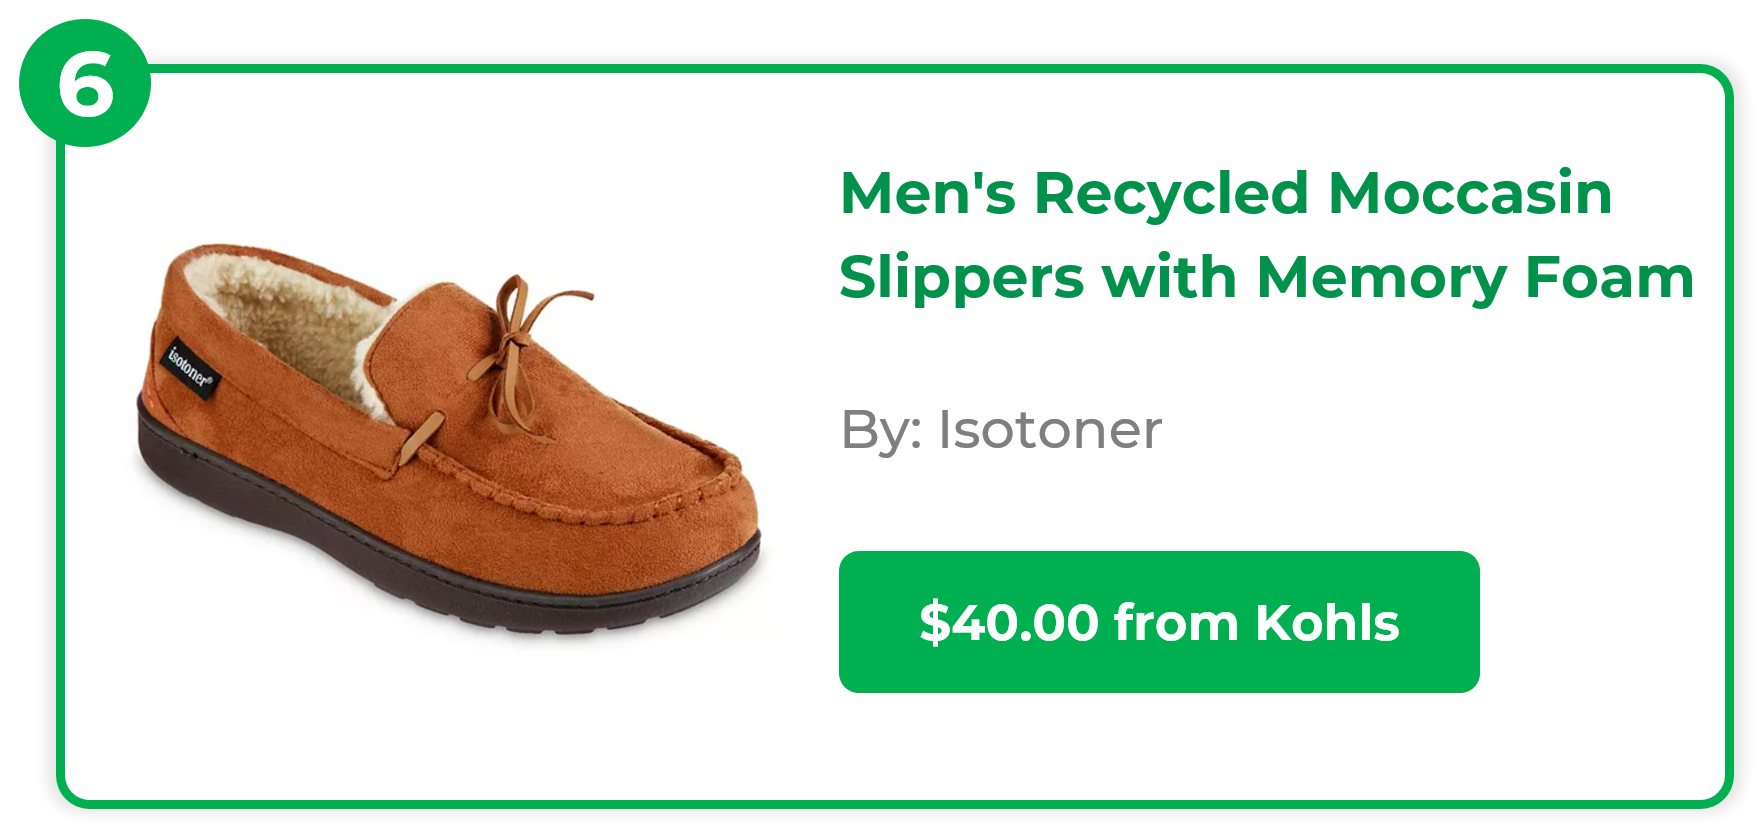 Men’s Recycled Moccasin Slippers with Memory Foam - Isotoner